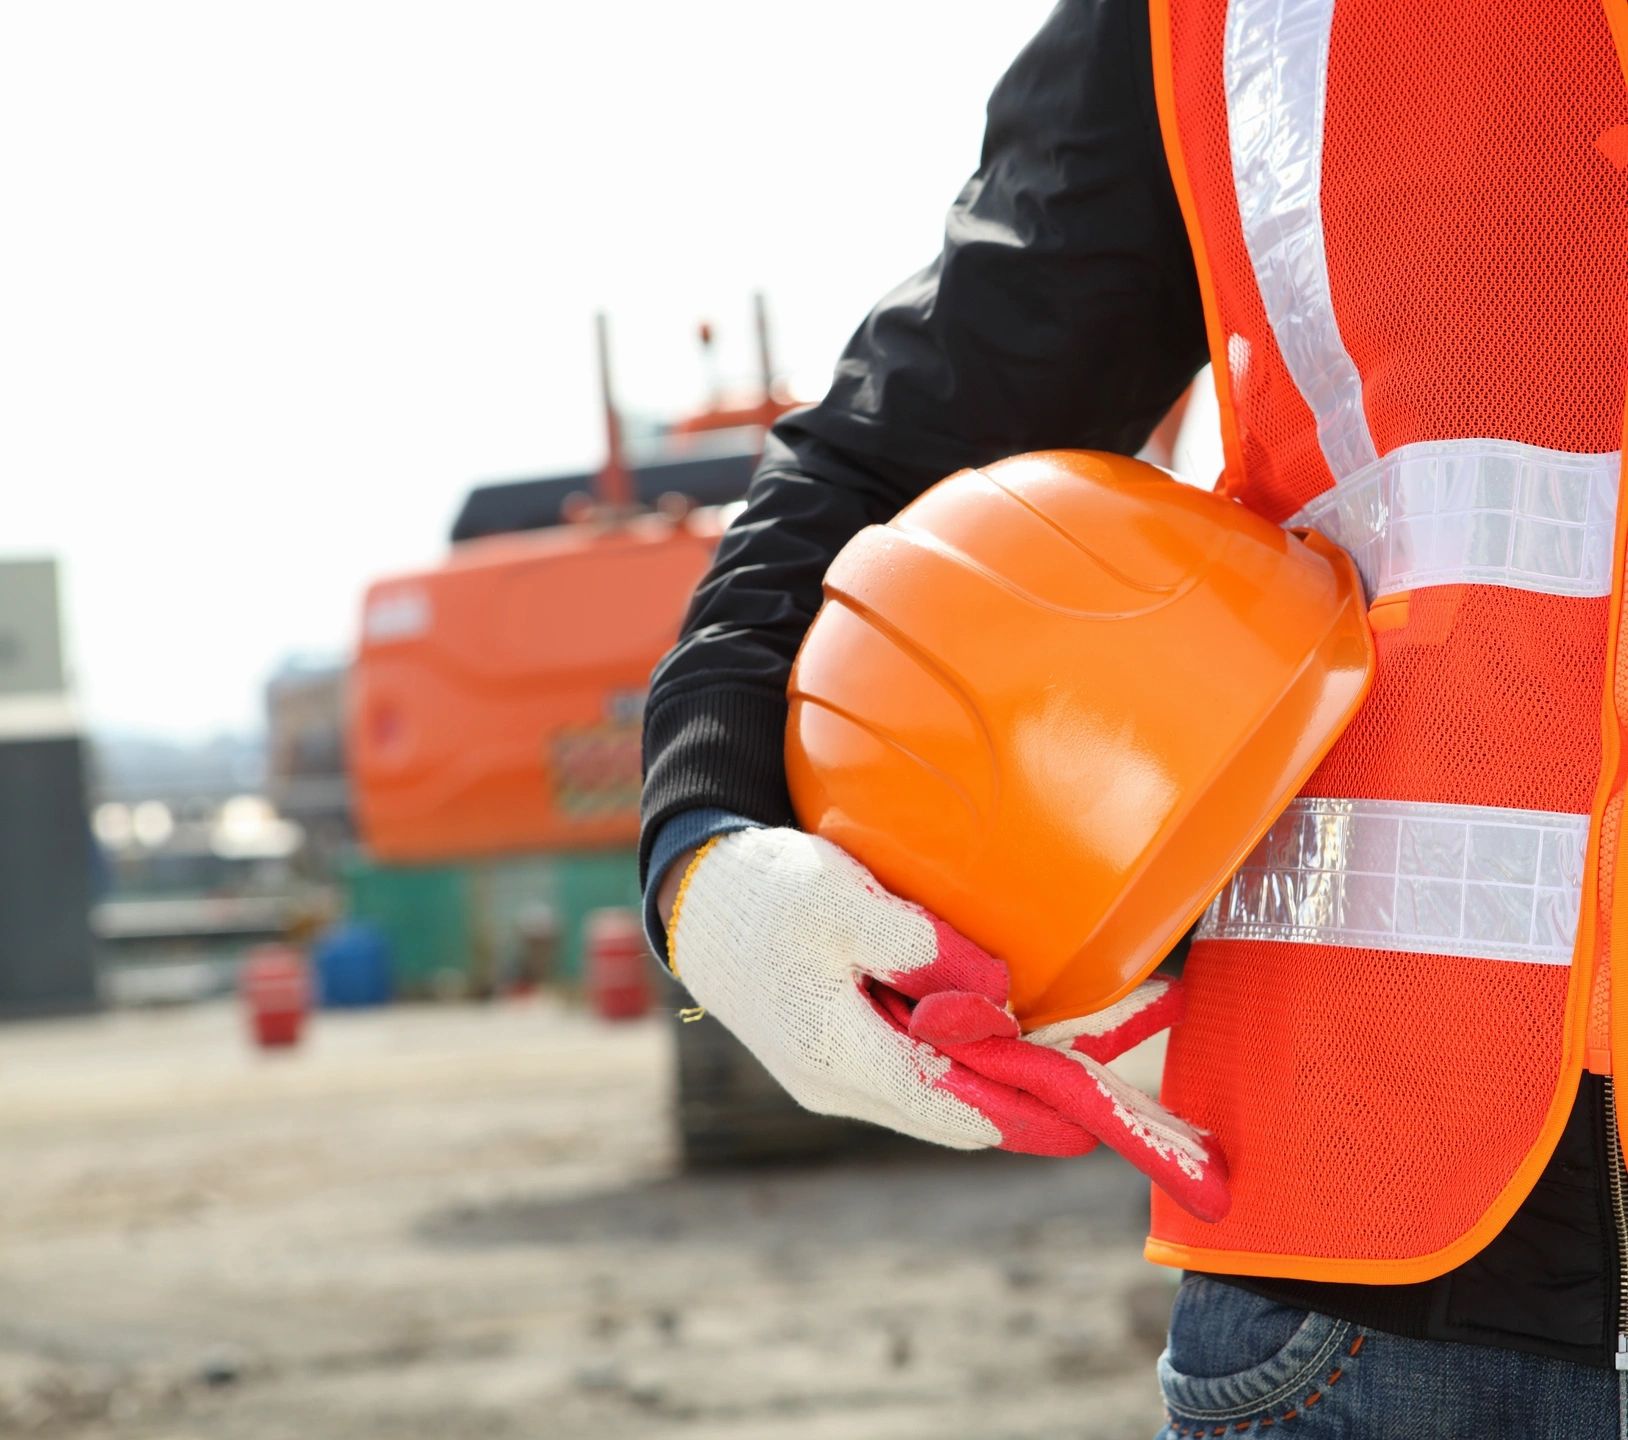 Wearing Personal protection equipment on building site 